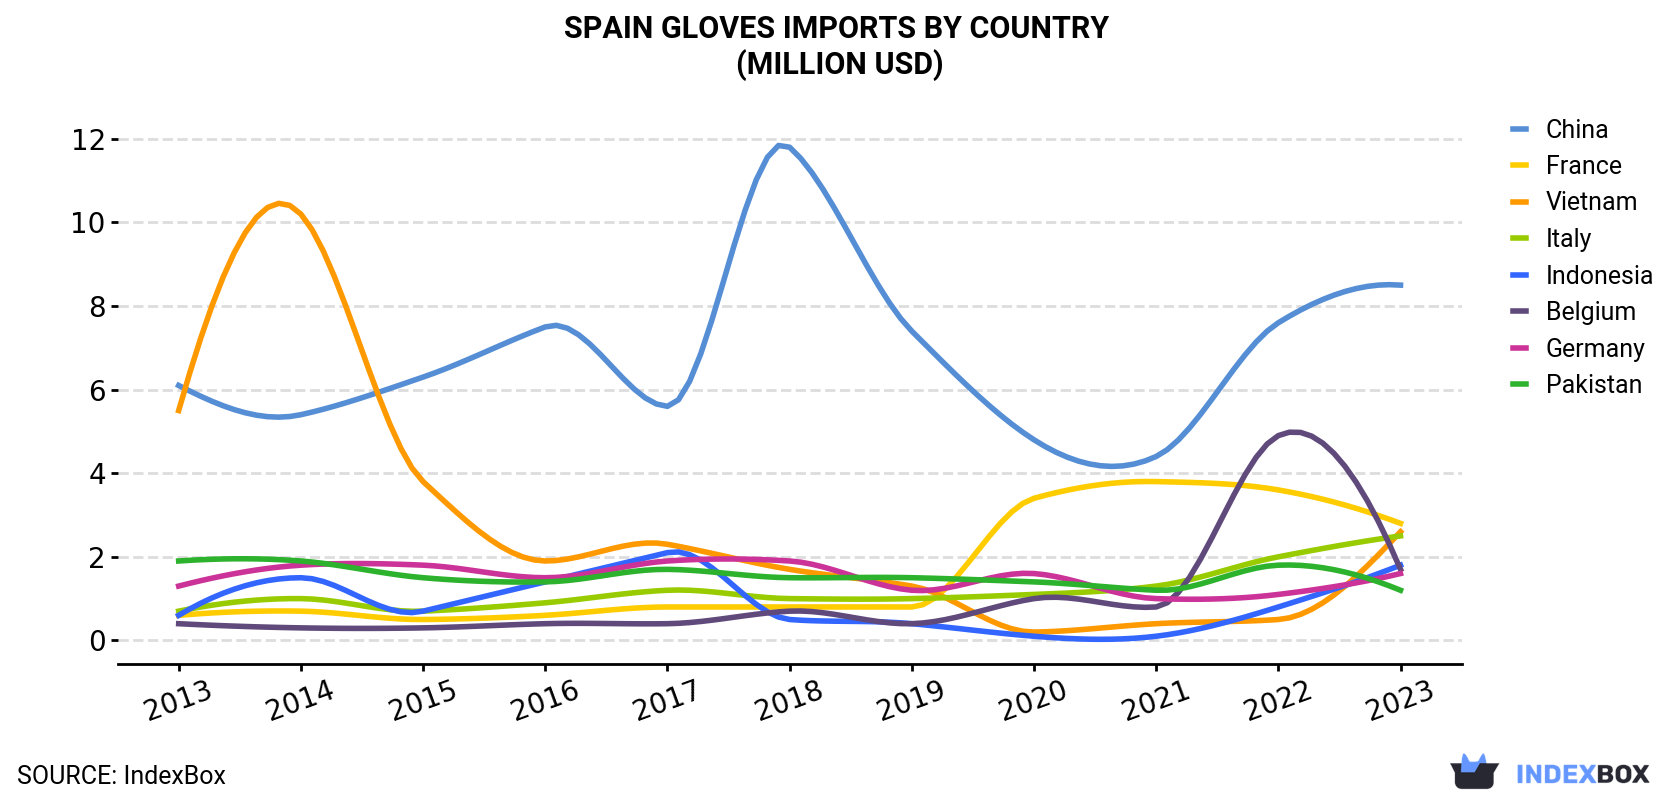 Spain Gloves Imports By Country (Million USD)